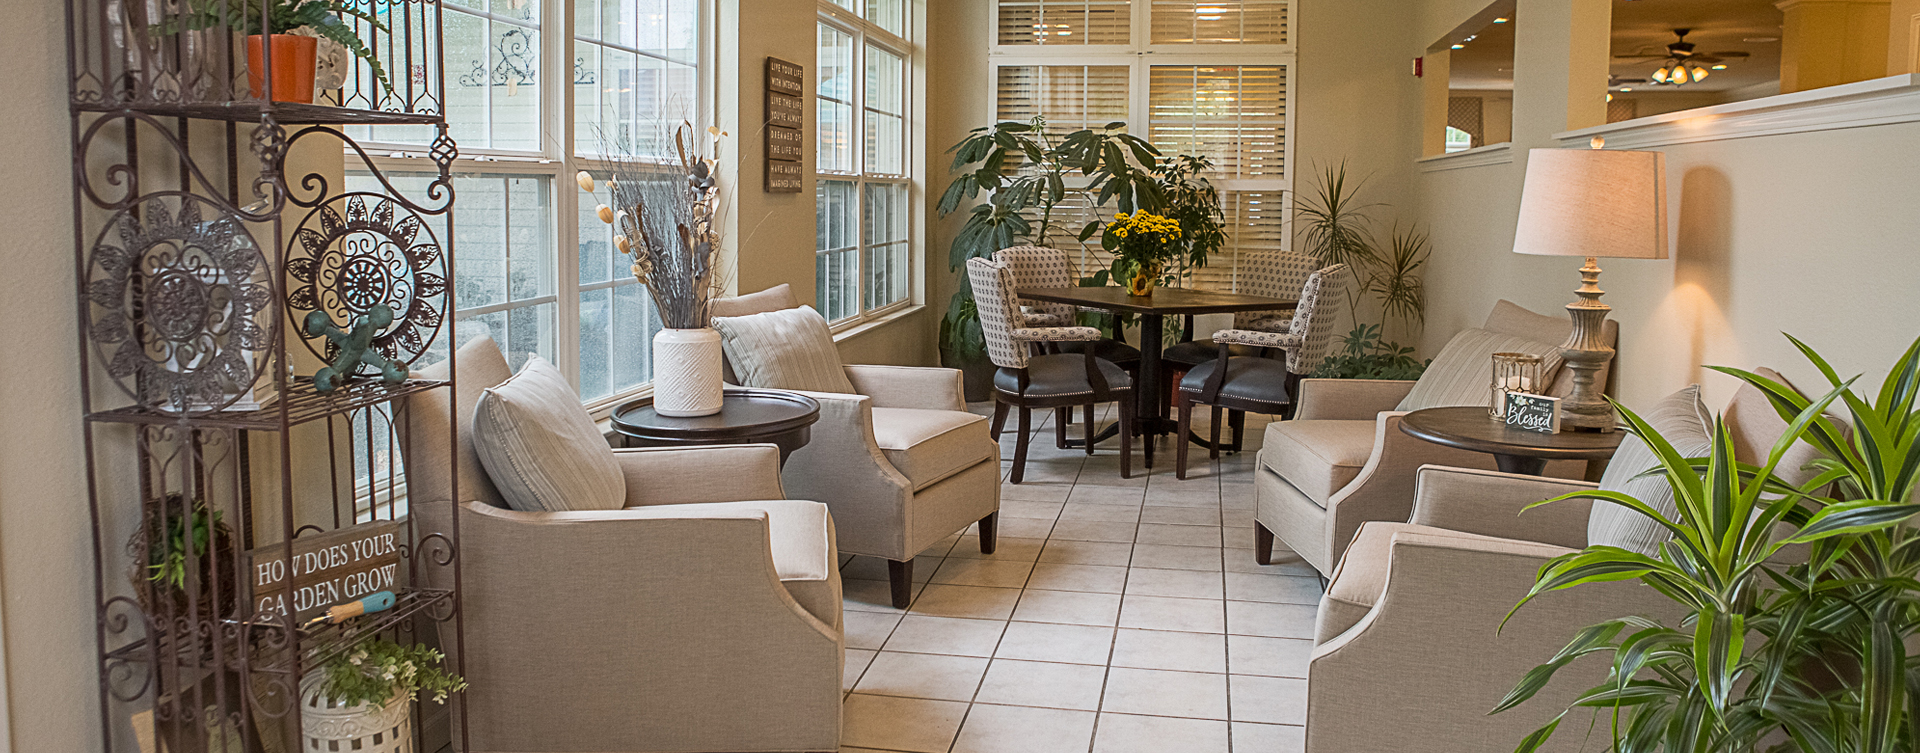 Relax in the warmth of the sunroom at Bickford of Iowa City